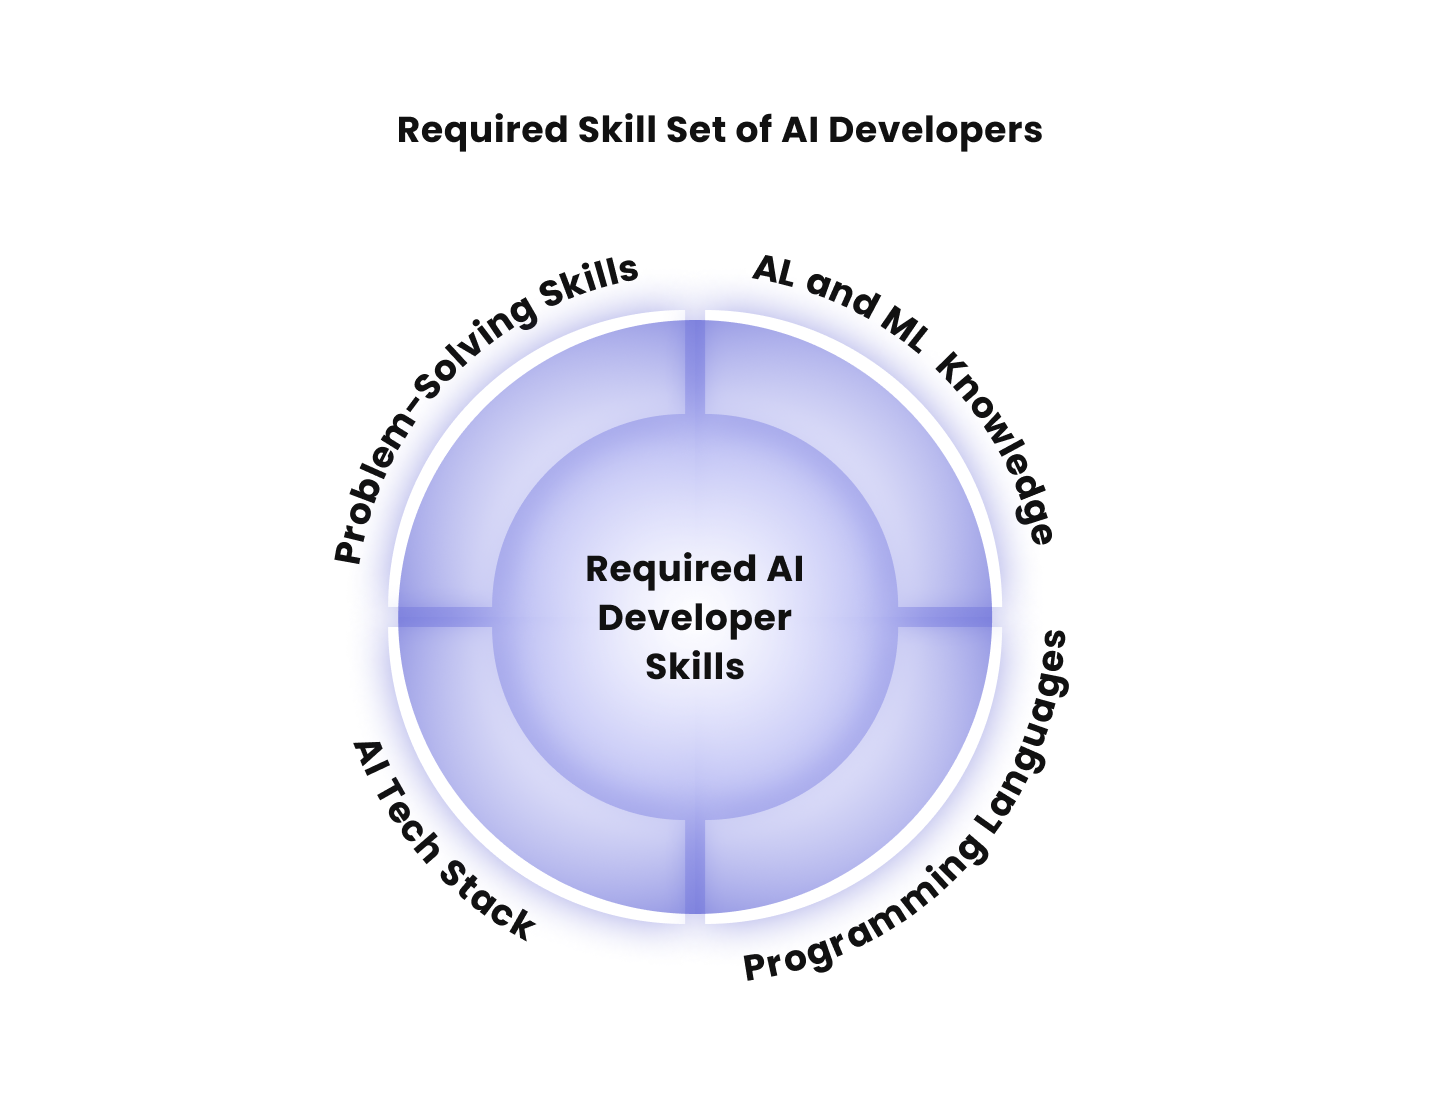 How to Hire AI Developers: Challenges and Solutions - 2